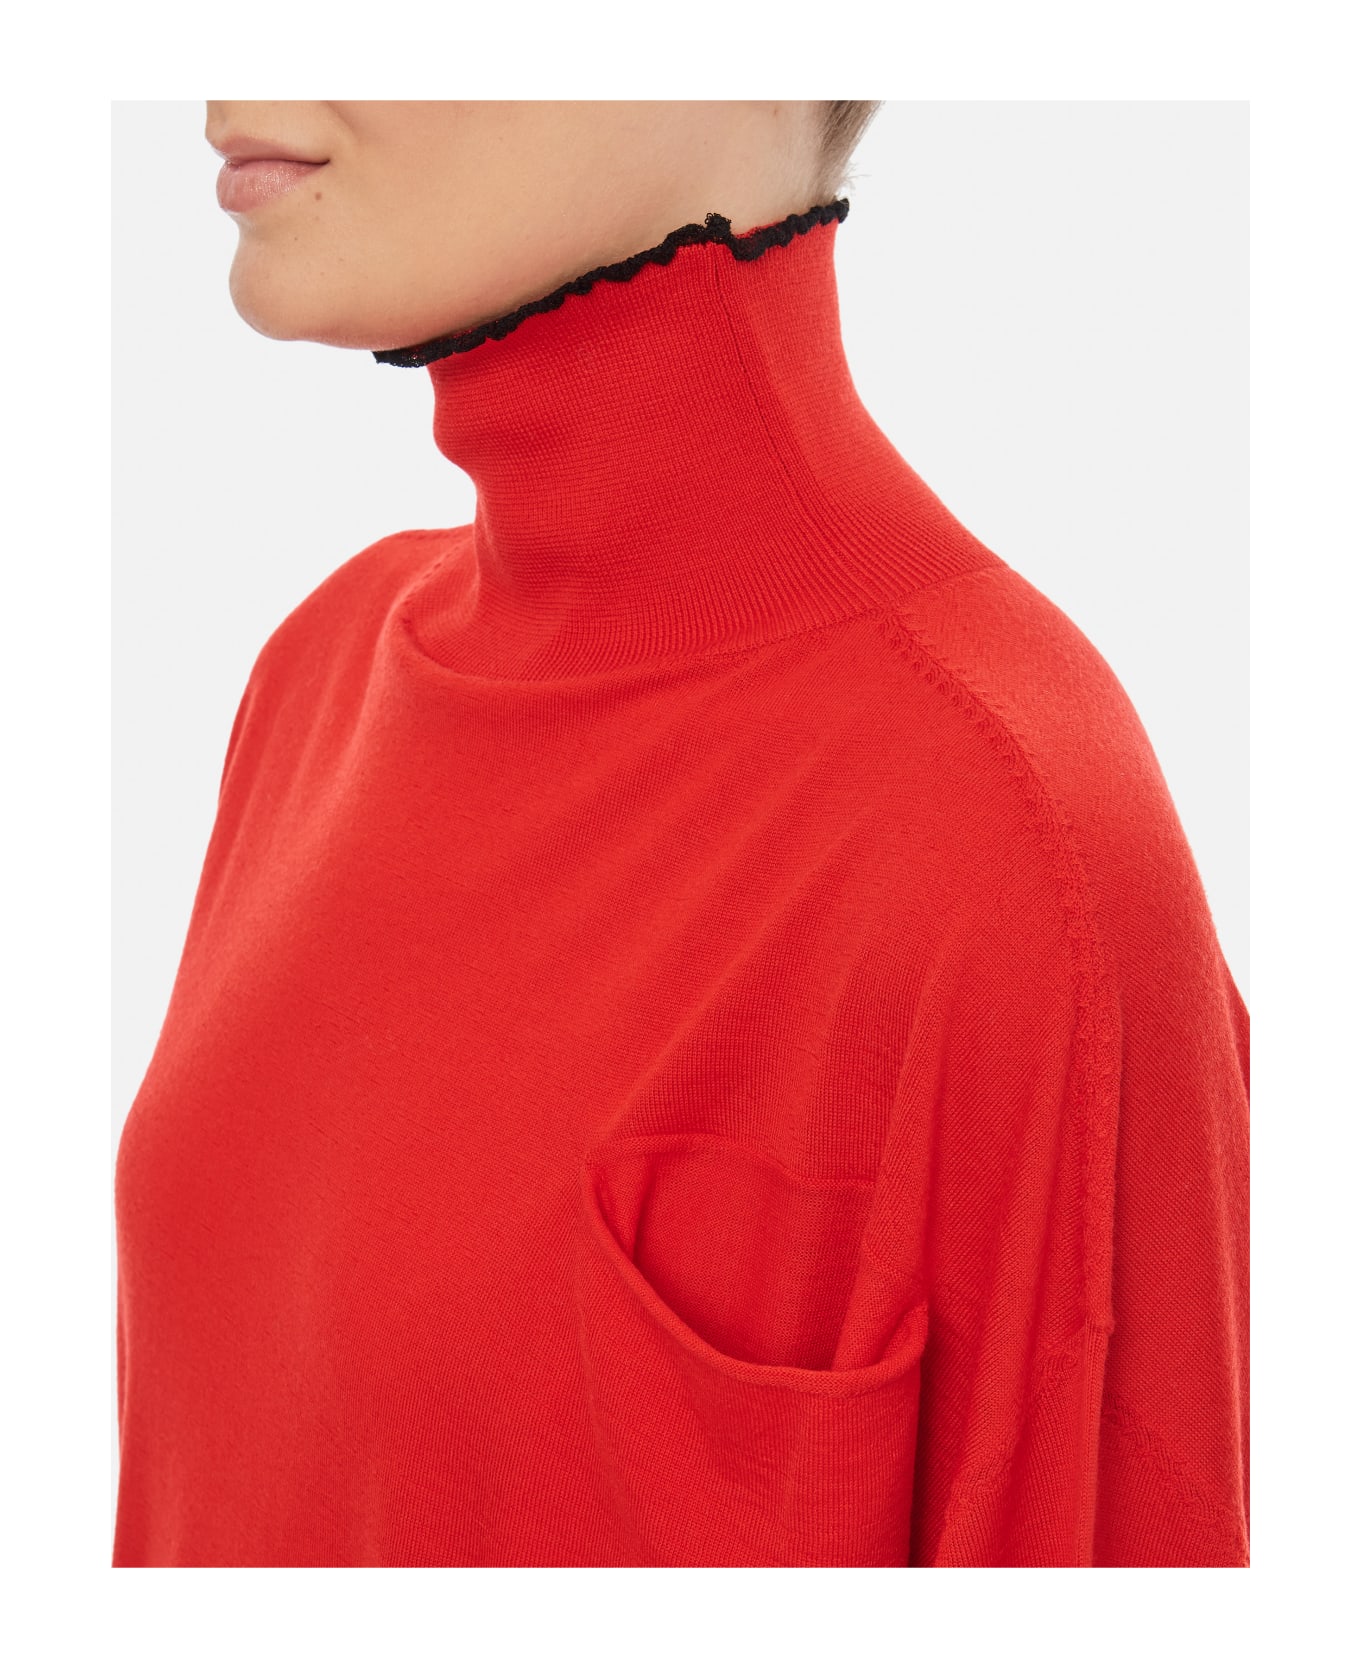 Quira Rollneck Wool Sweater - Red ニットウェア